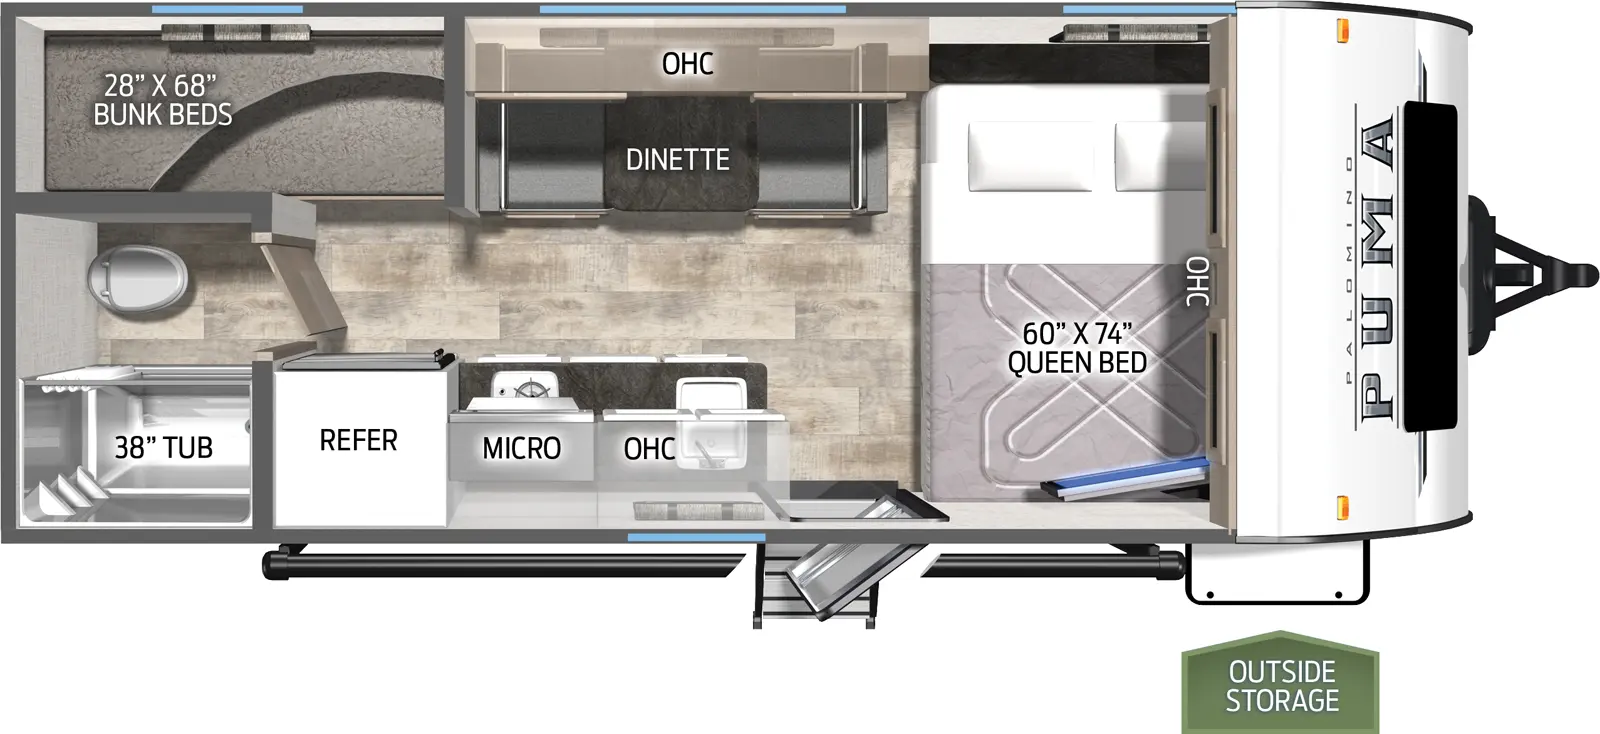 The 16BHX has no slide outs. Exterior features include a 12 foot awning. Interior layout from the front to back: queen bed with end table; booth dinette; kitchen with cooktop and refrigerator; full bathroom; top and bottom bunk beds.
